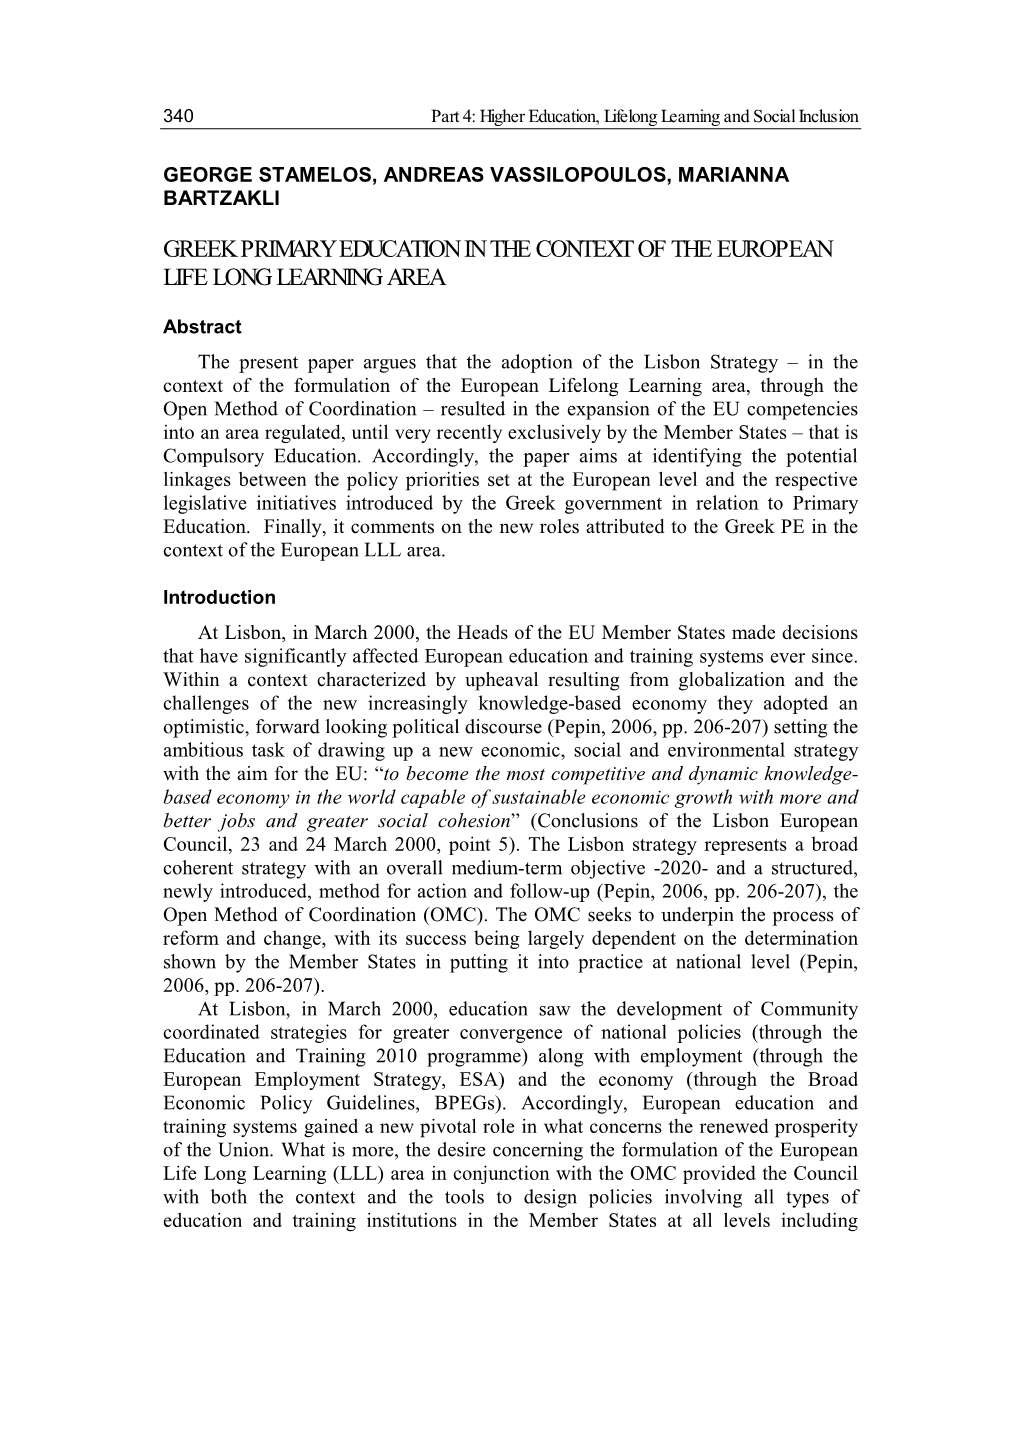 Greek Primary Education in the Context of the European Life Long Learning Area